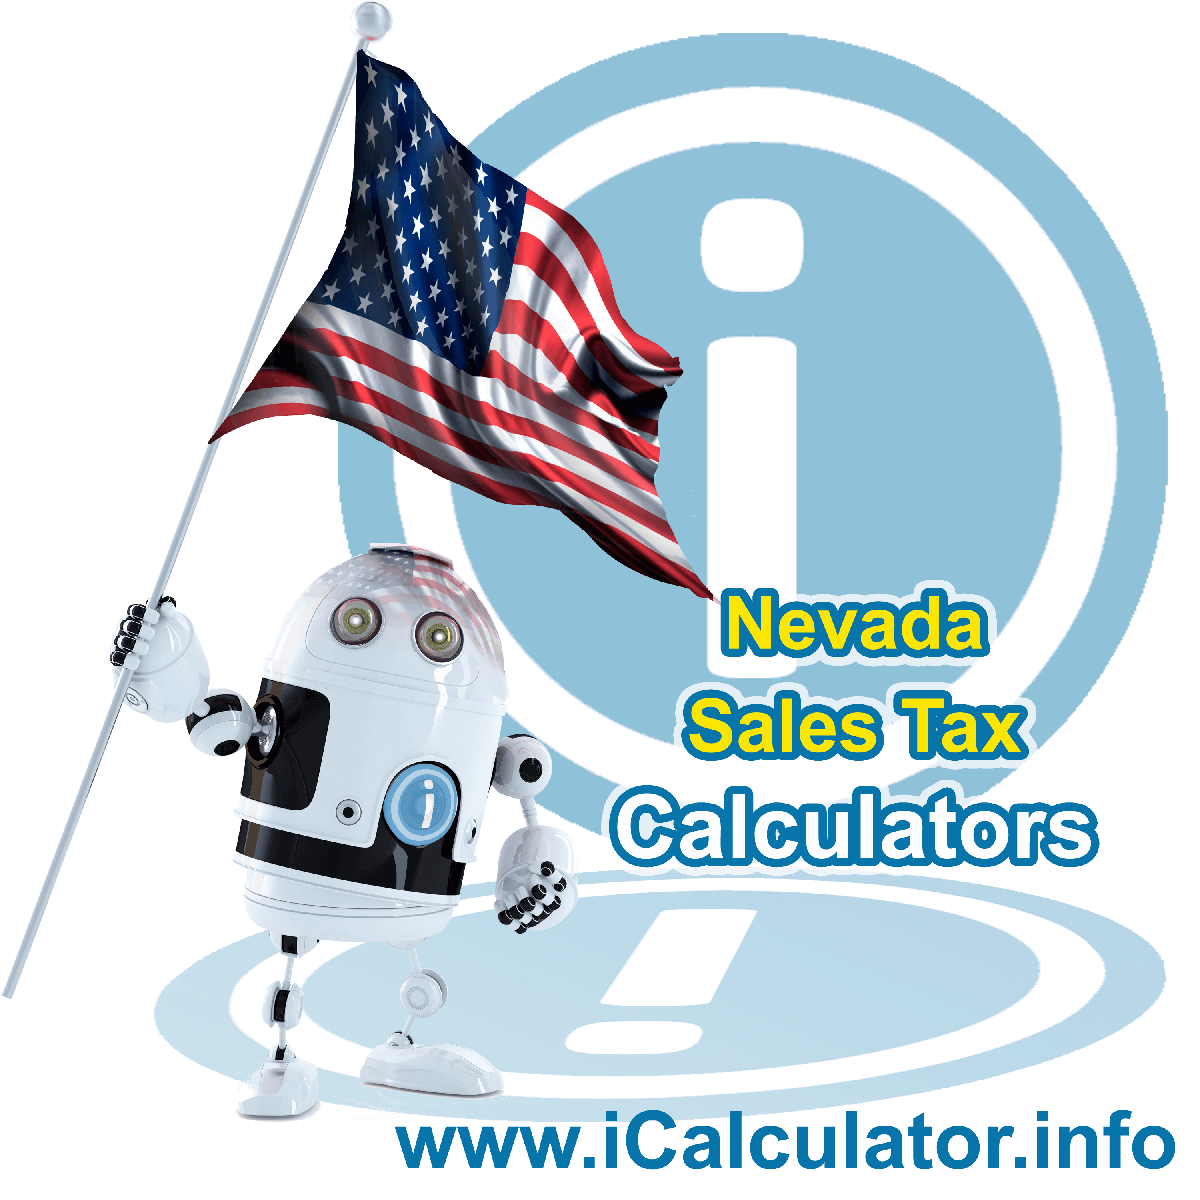 Washoe County Sales Rates: This image illustrates a calculator robot calculating Washoe County sales tax manually using the Washoe County Sales Tax Formula. You can use this information to calculate Washoe County Sales Tax manually or use the Washoe County Sales Tax Calculator to calculate sales tax online.